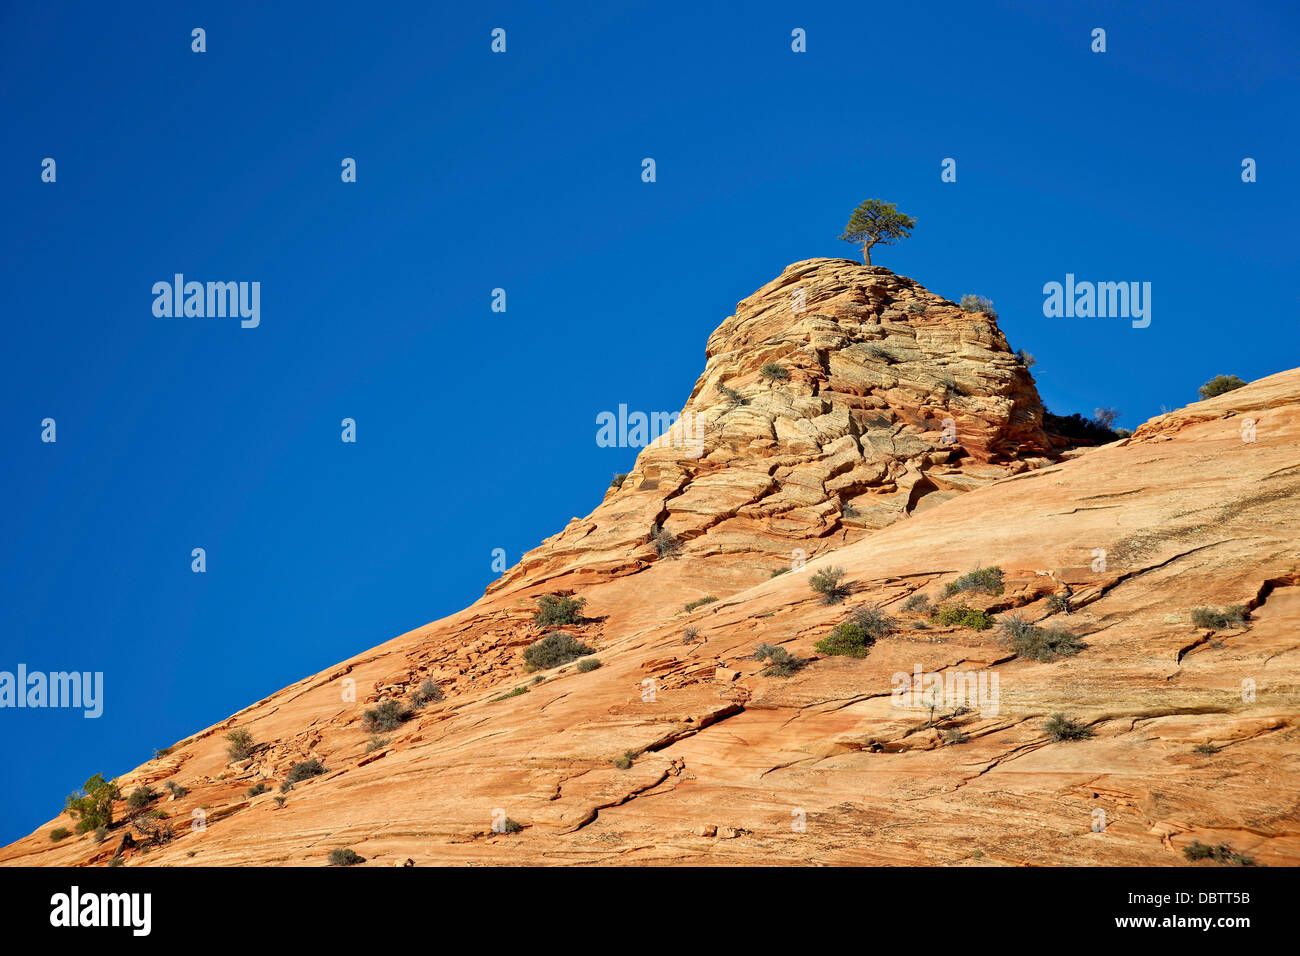 Tree atop a sandstone hill, Zion National Park, Utah, United States of America, North America Stock Photo